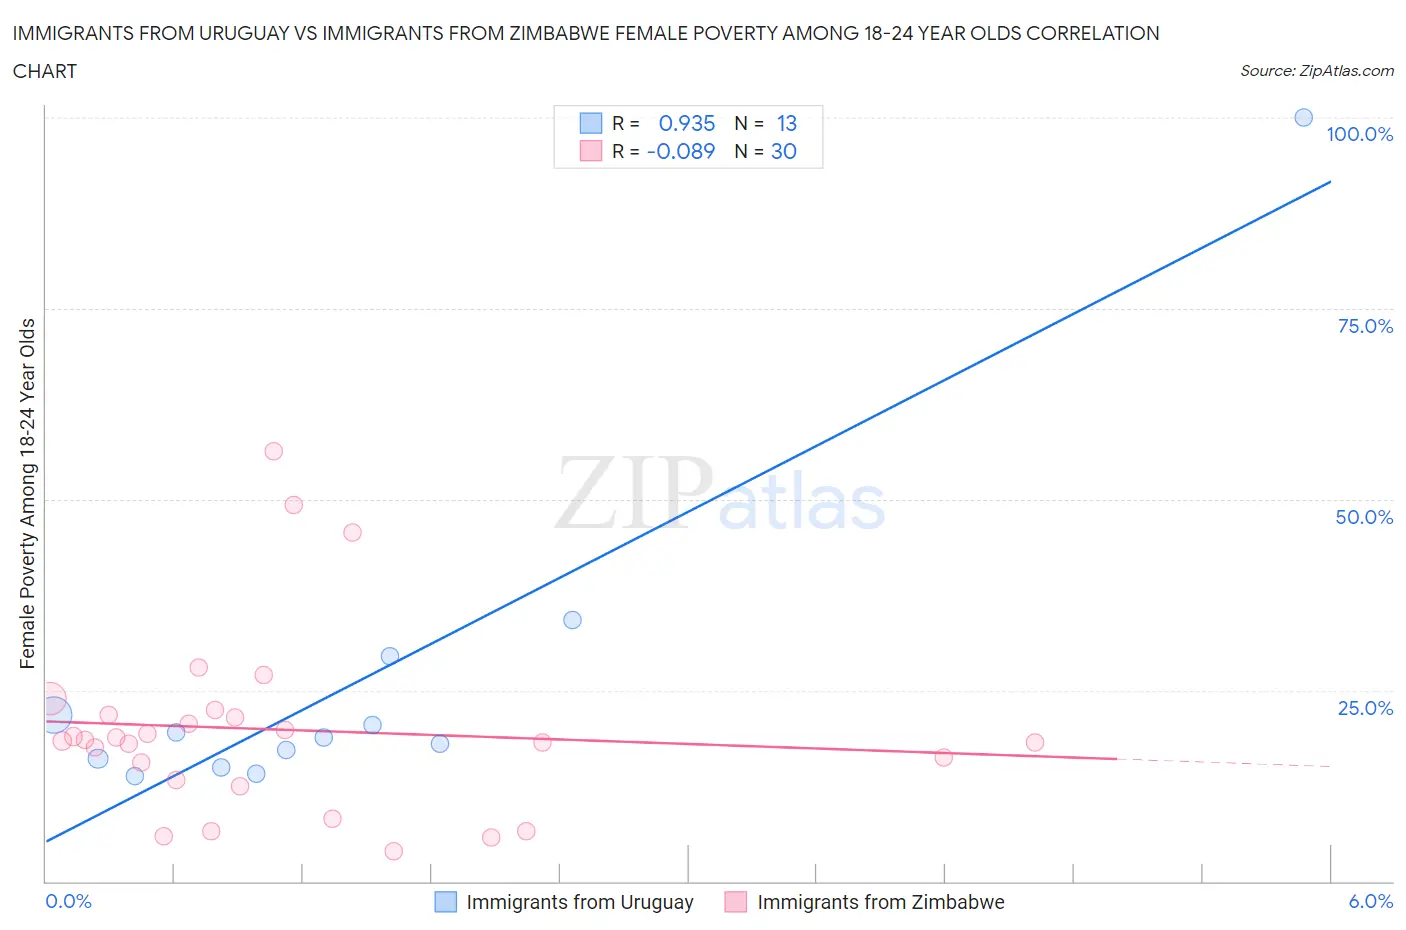 Immigrants from Uruguay vs Immigrants from Zimbabwe Female Poverty Among 18-24 Year Olds